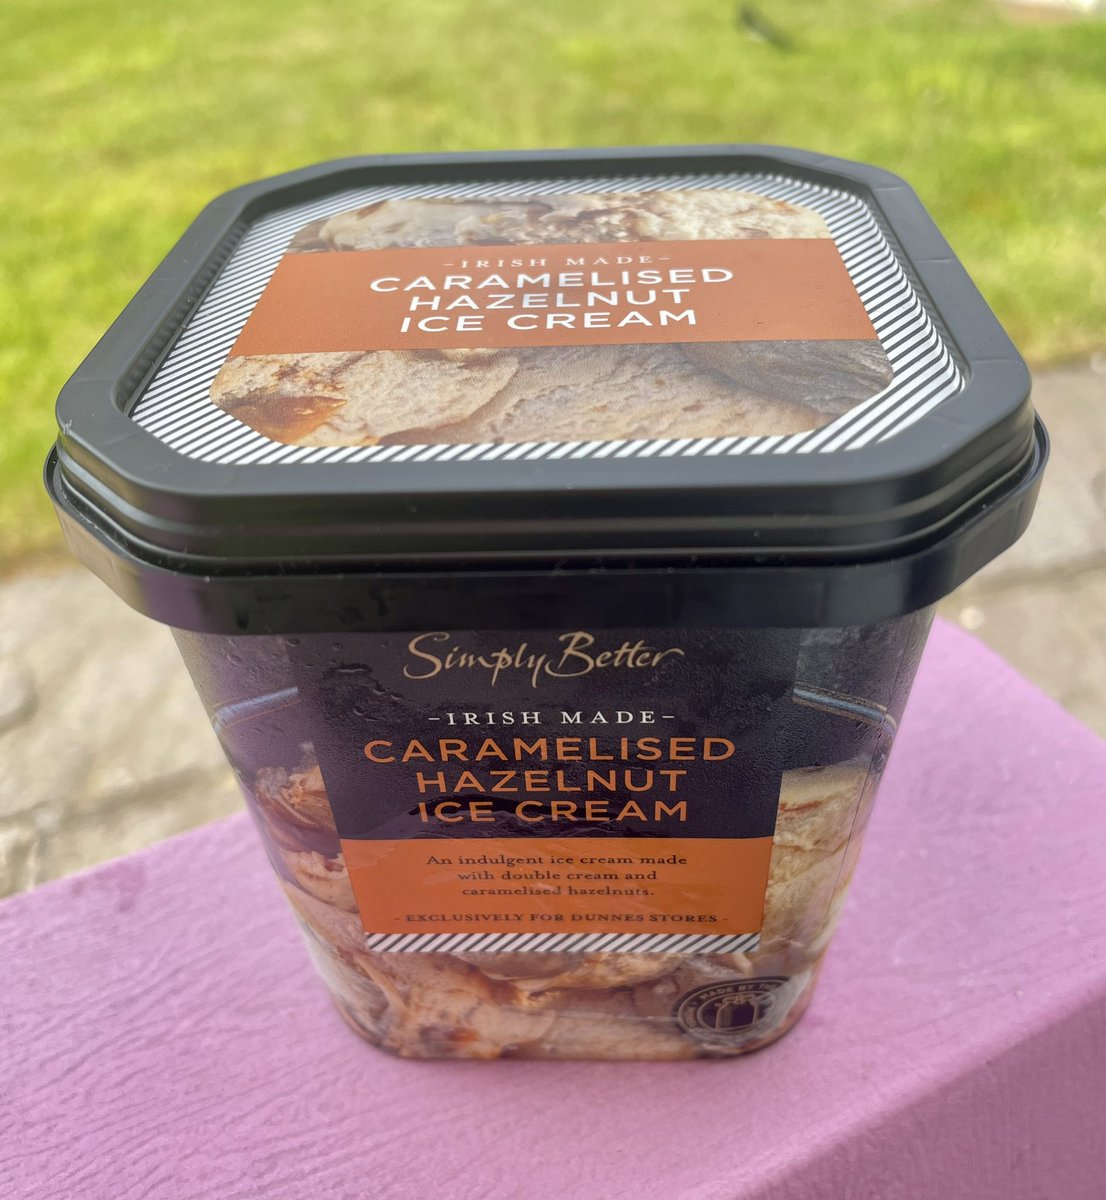 This is probably my favourite tub of ice cream - it’s made in Ireland by @morelliicecream for @SimplyBetterDS Yum! Highly recommended. #uachtarreoite #icecream #glace #Eis 🍨